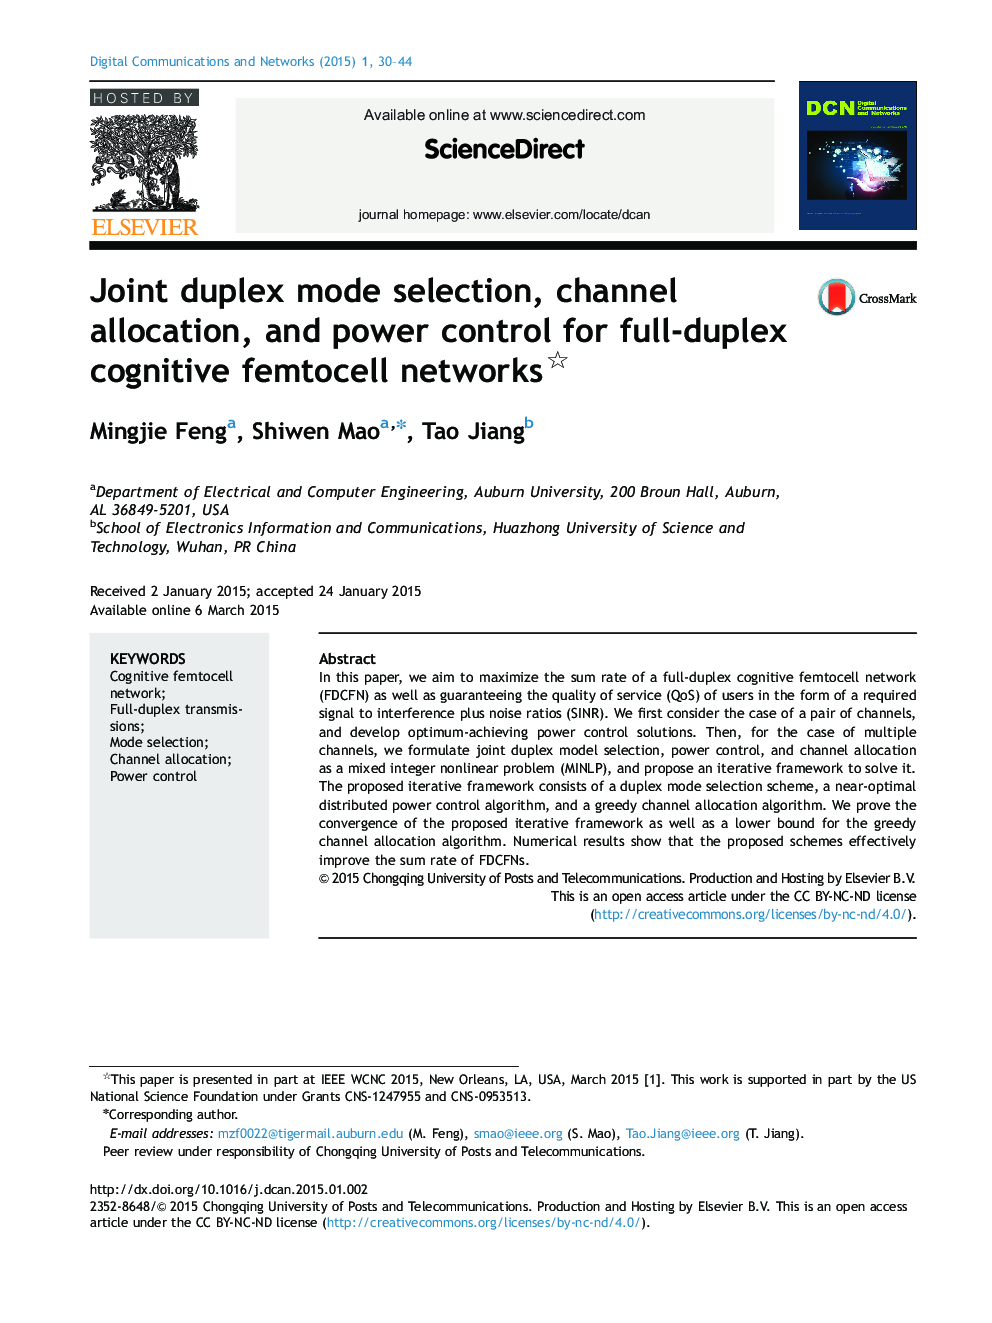 Joint duplex mode selection, channel allocation, and power control for full-duplex cognitive femtocell networks 